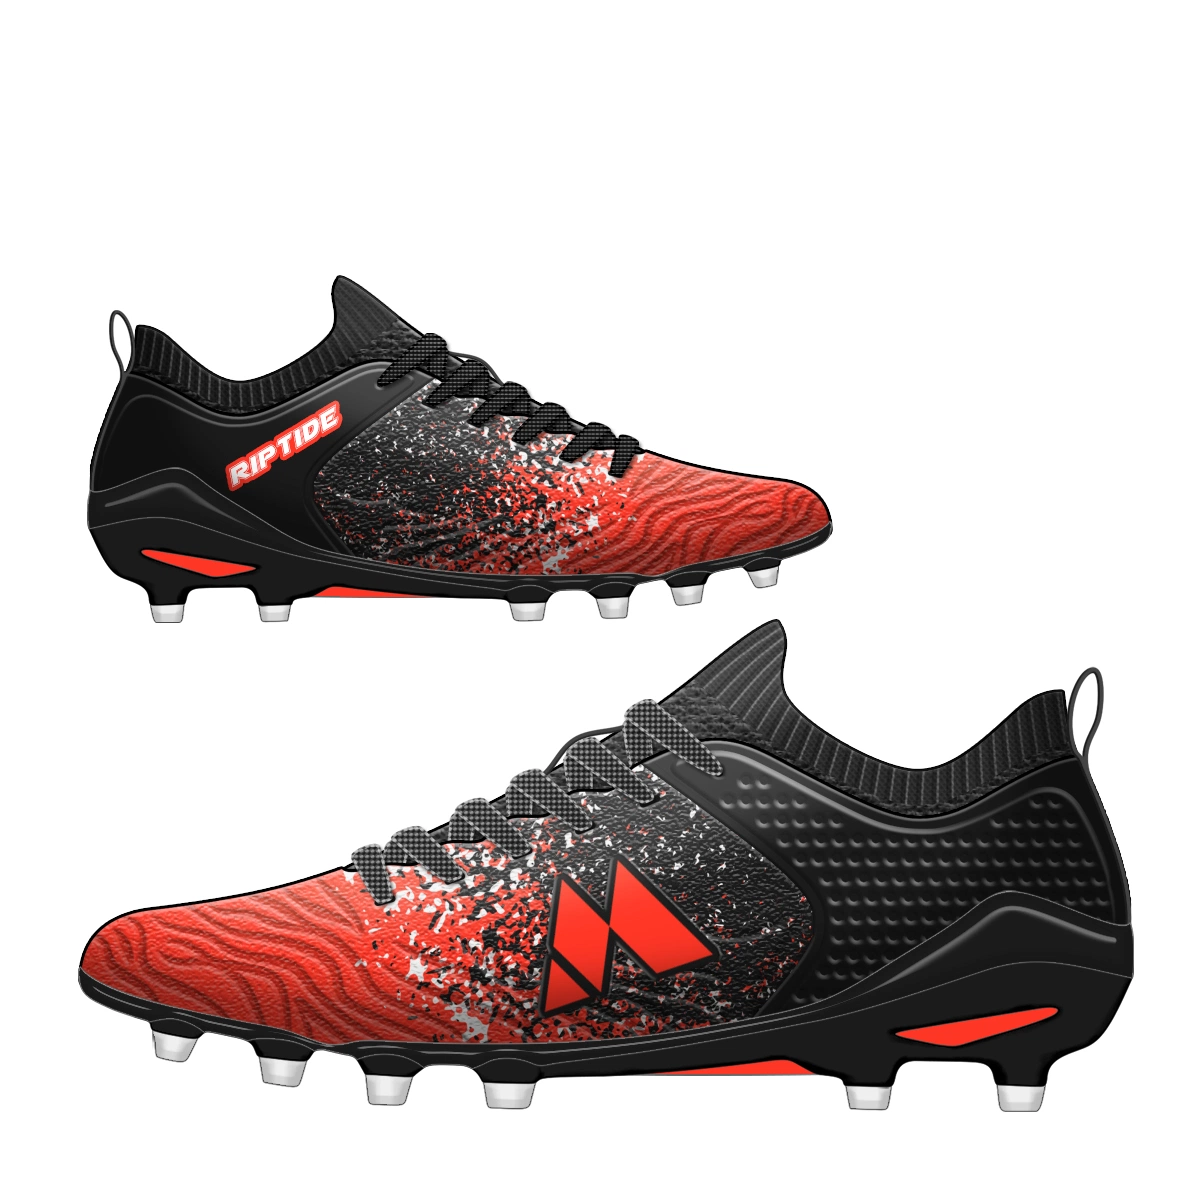 Magnetico PRO Fg Outdoor, Firm Ground Grass Turf Cleats Indoor Soccer Football Sports Boots Shoes